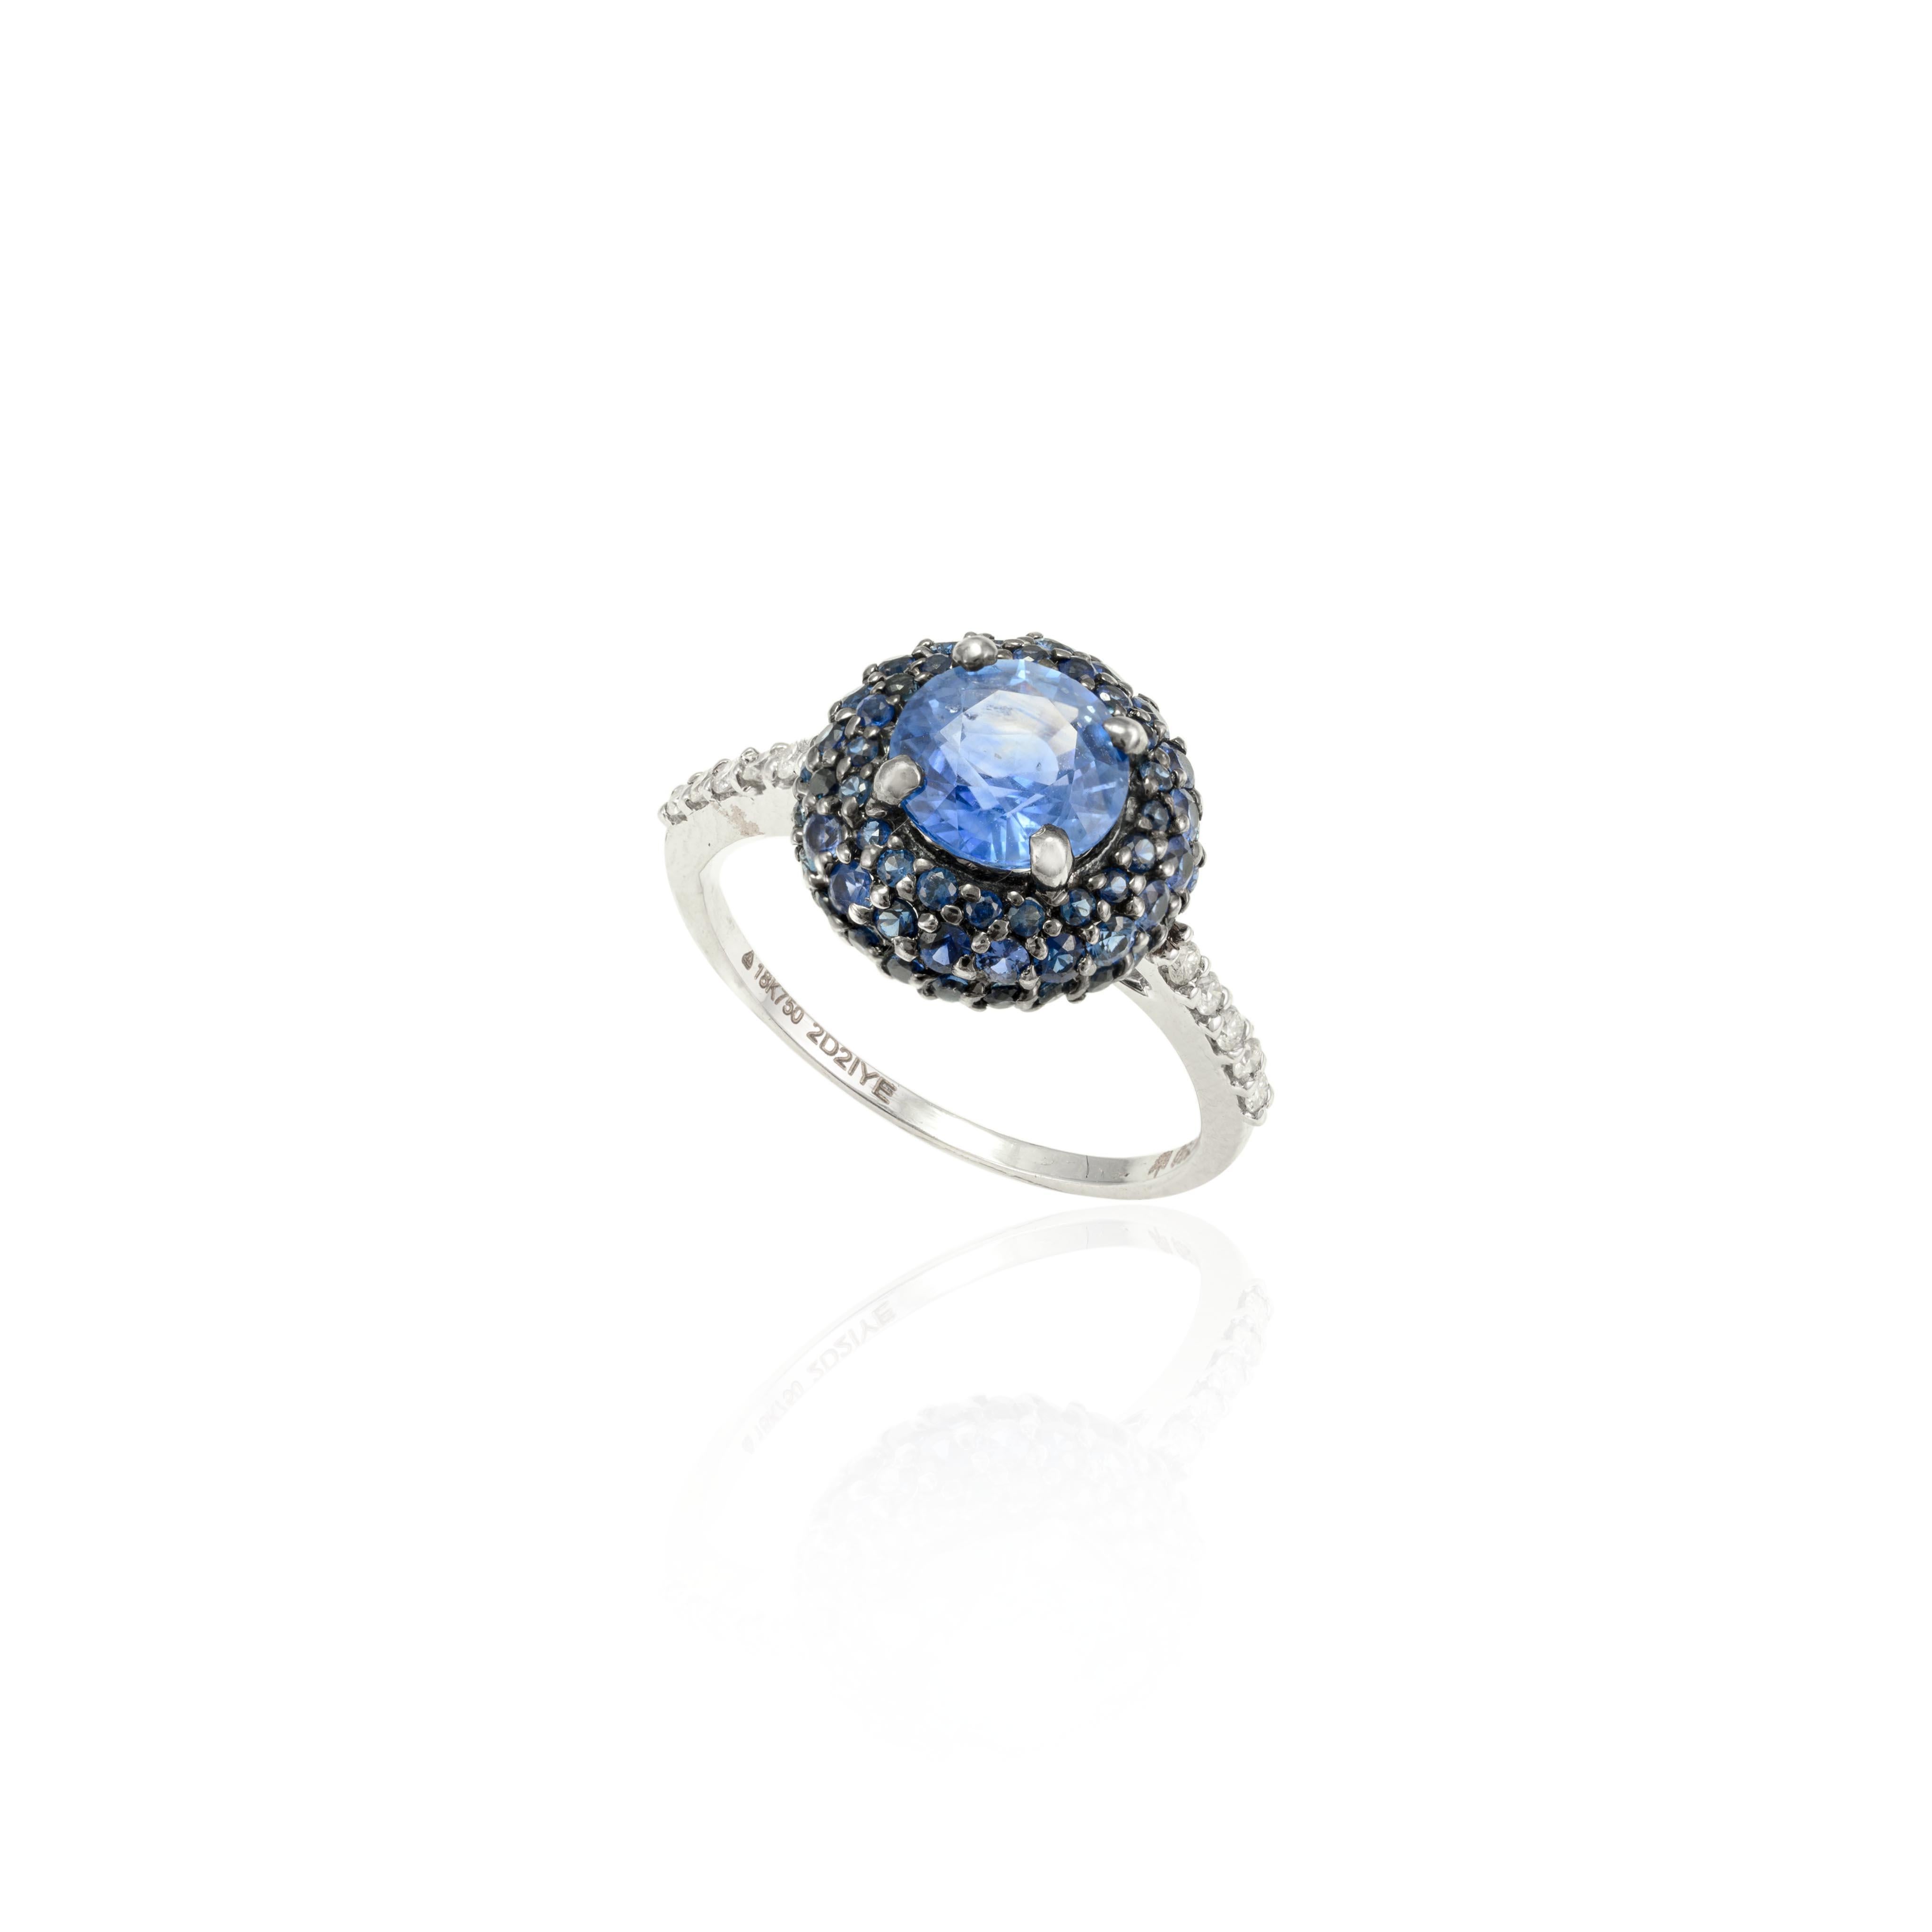 For Sale:  2.58 Ct Round Pave Blue Sapphire Ring in 18k Solid White Gold with Diamonds 2